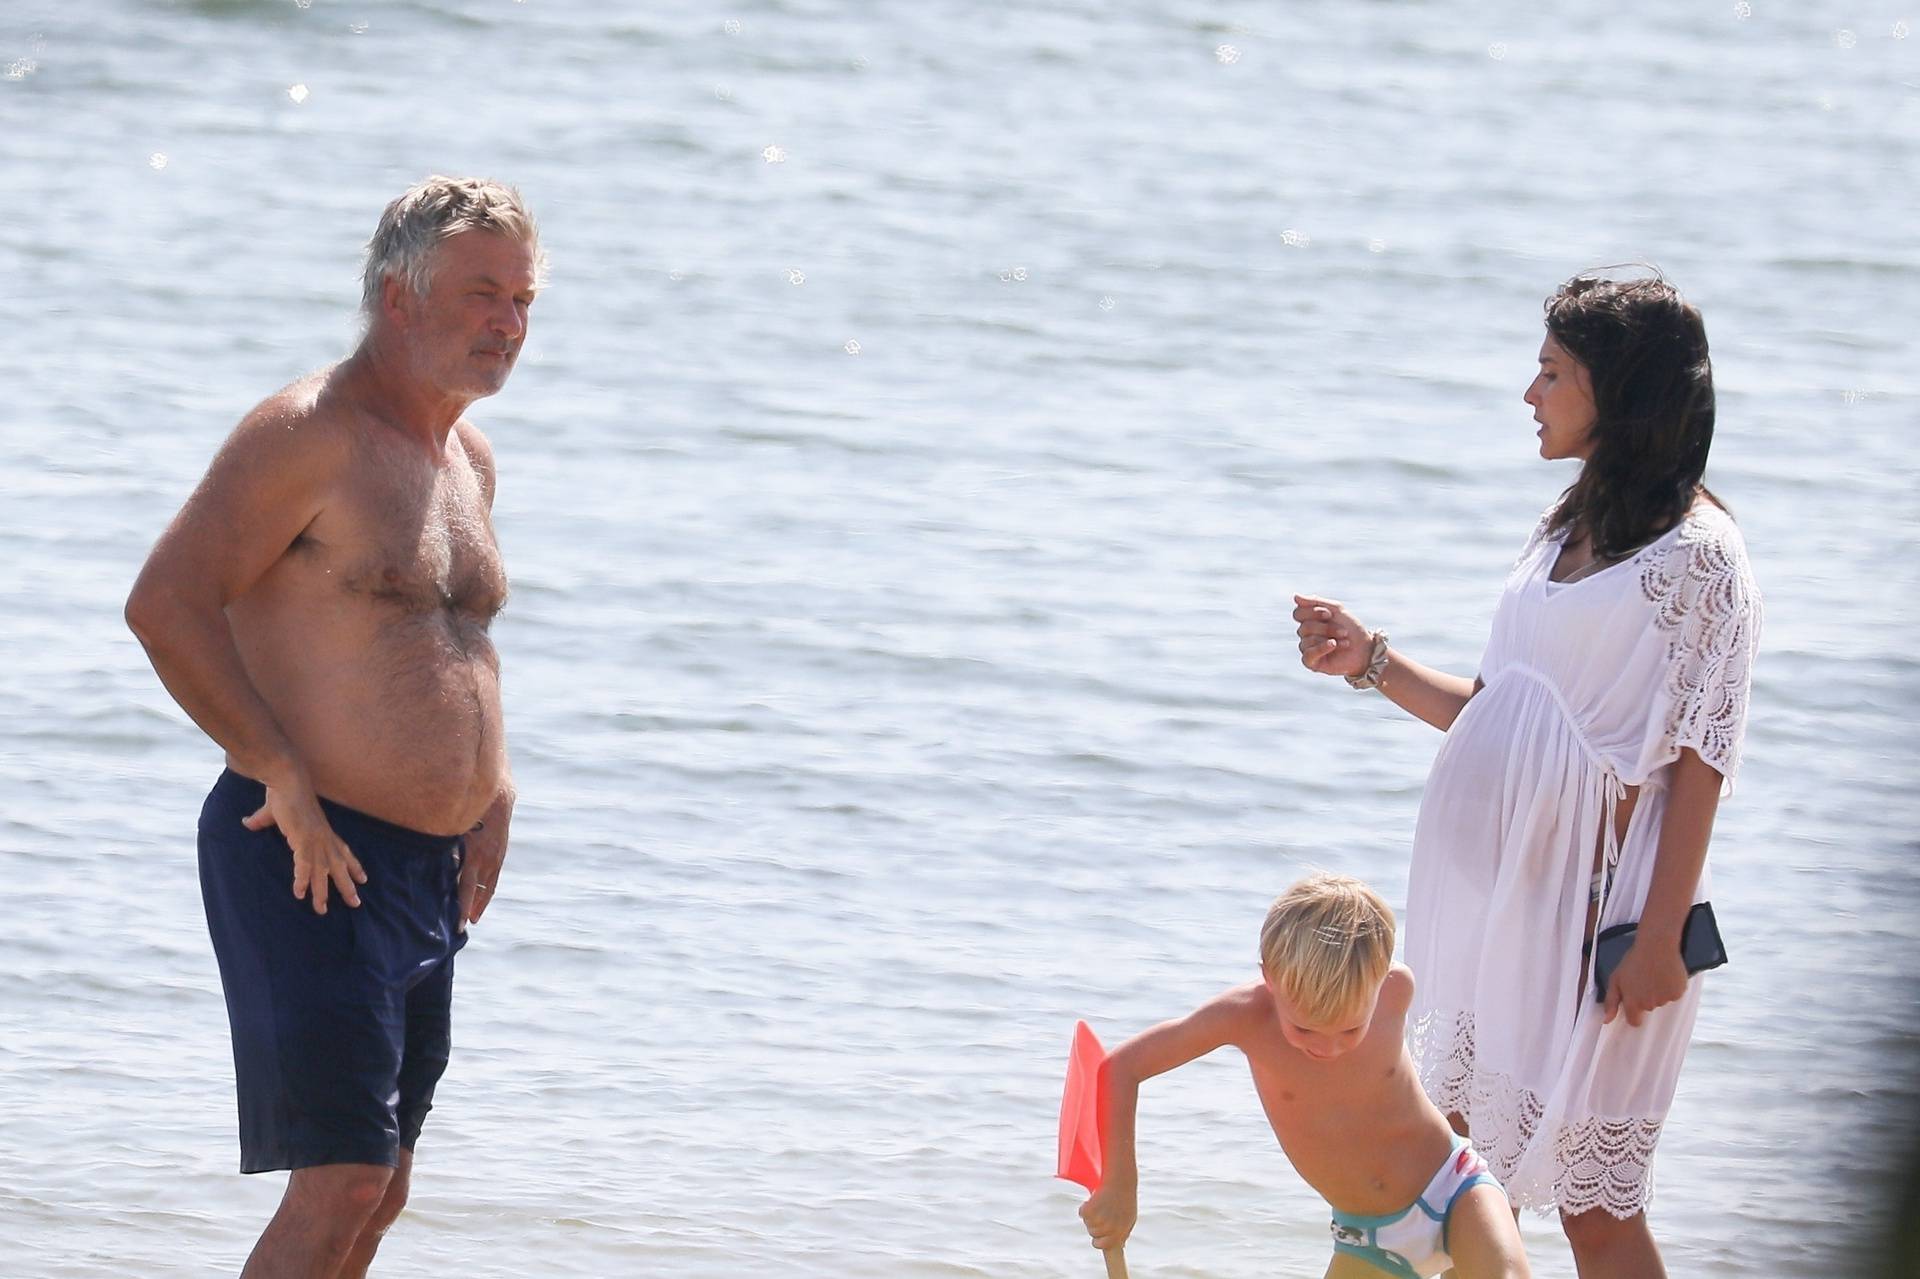 *EXCLUSIVE* Alec Baldwin and his wife Hilaria enjoy another day at the beach on Sunday with their kids